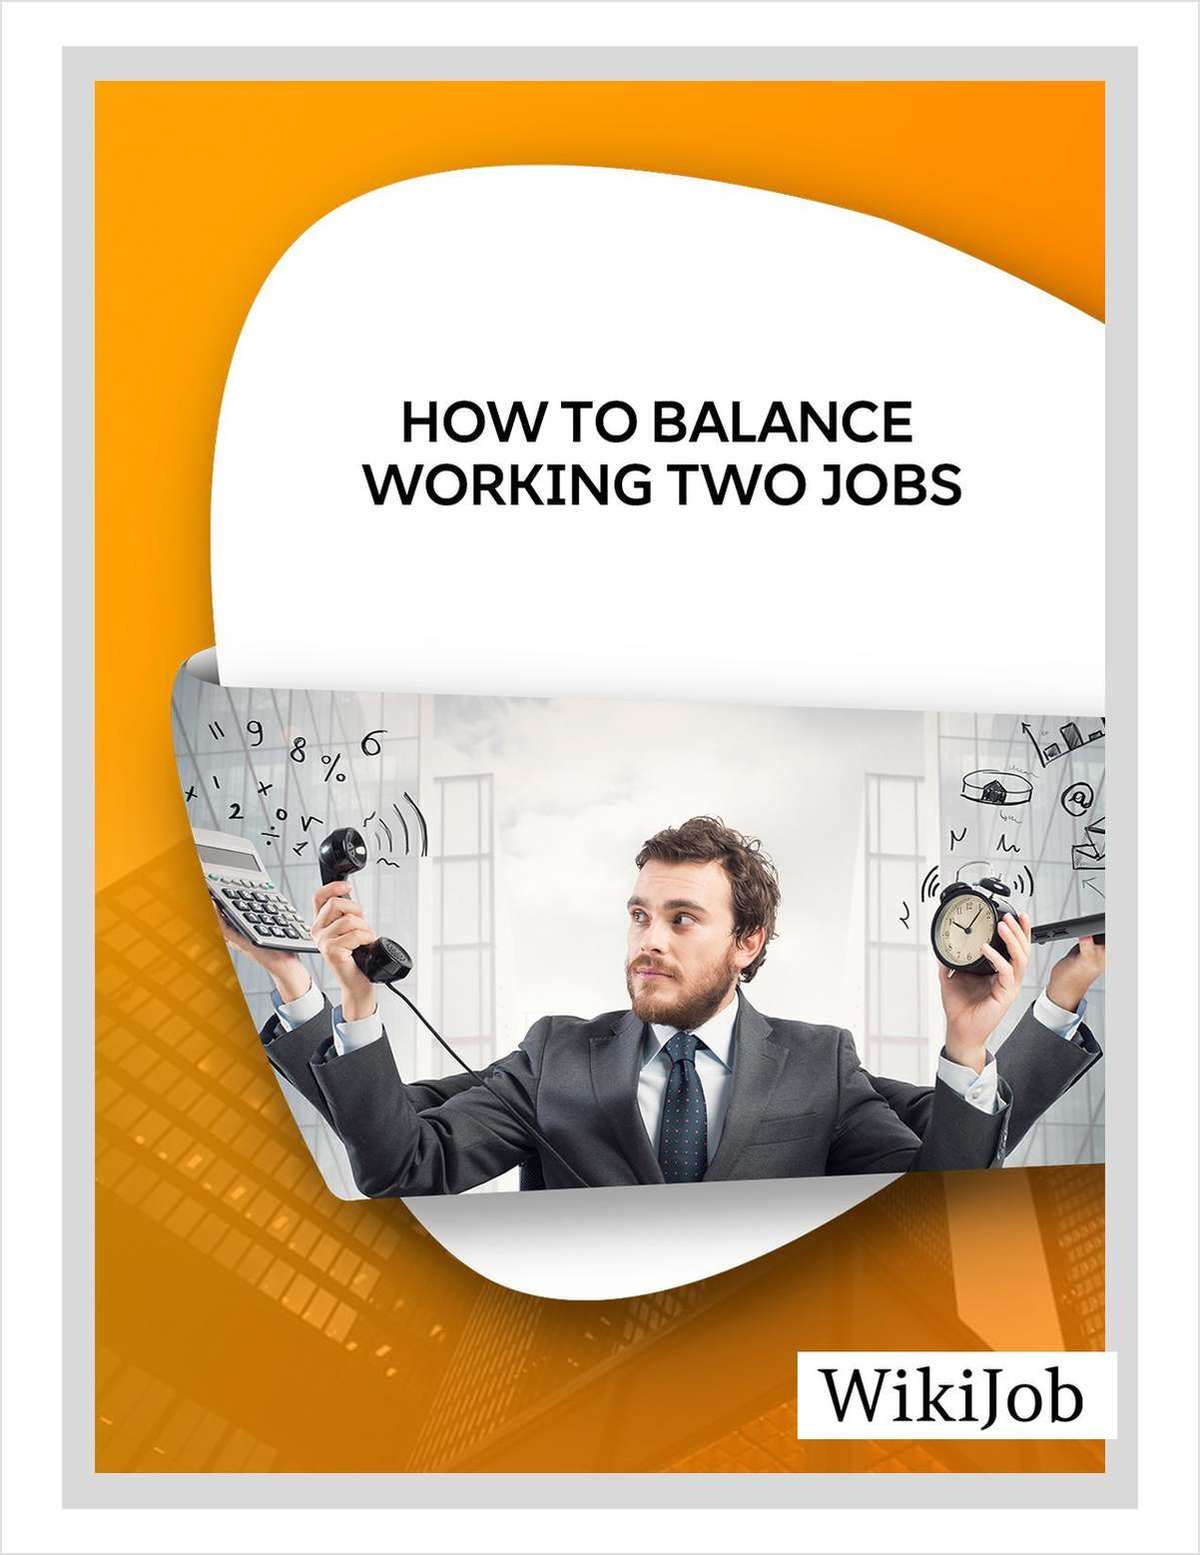 How to Balance Working Two Jobs